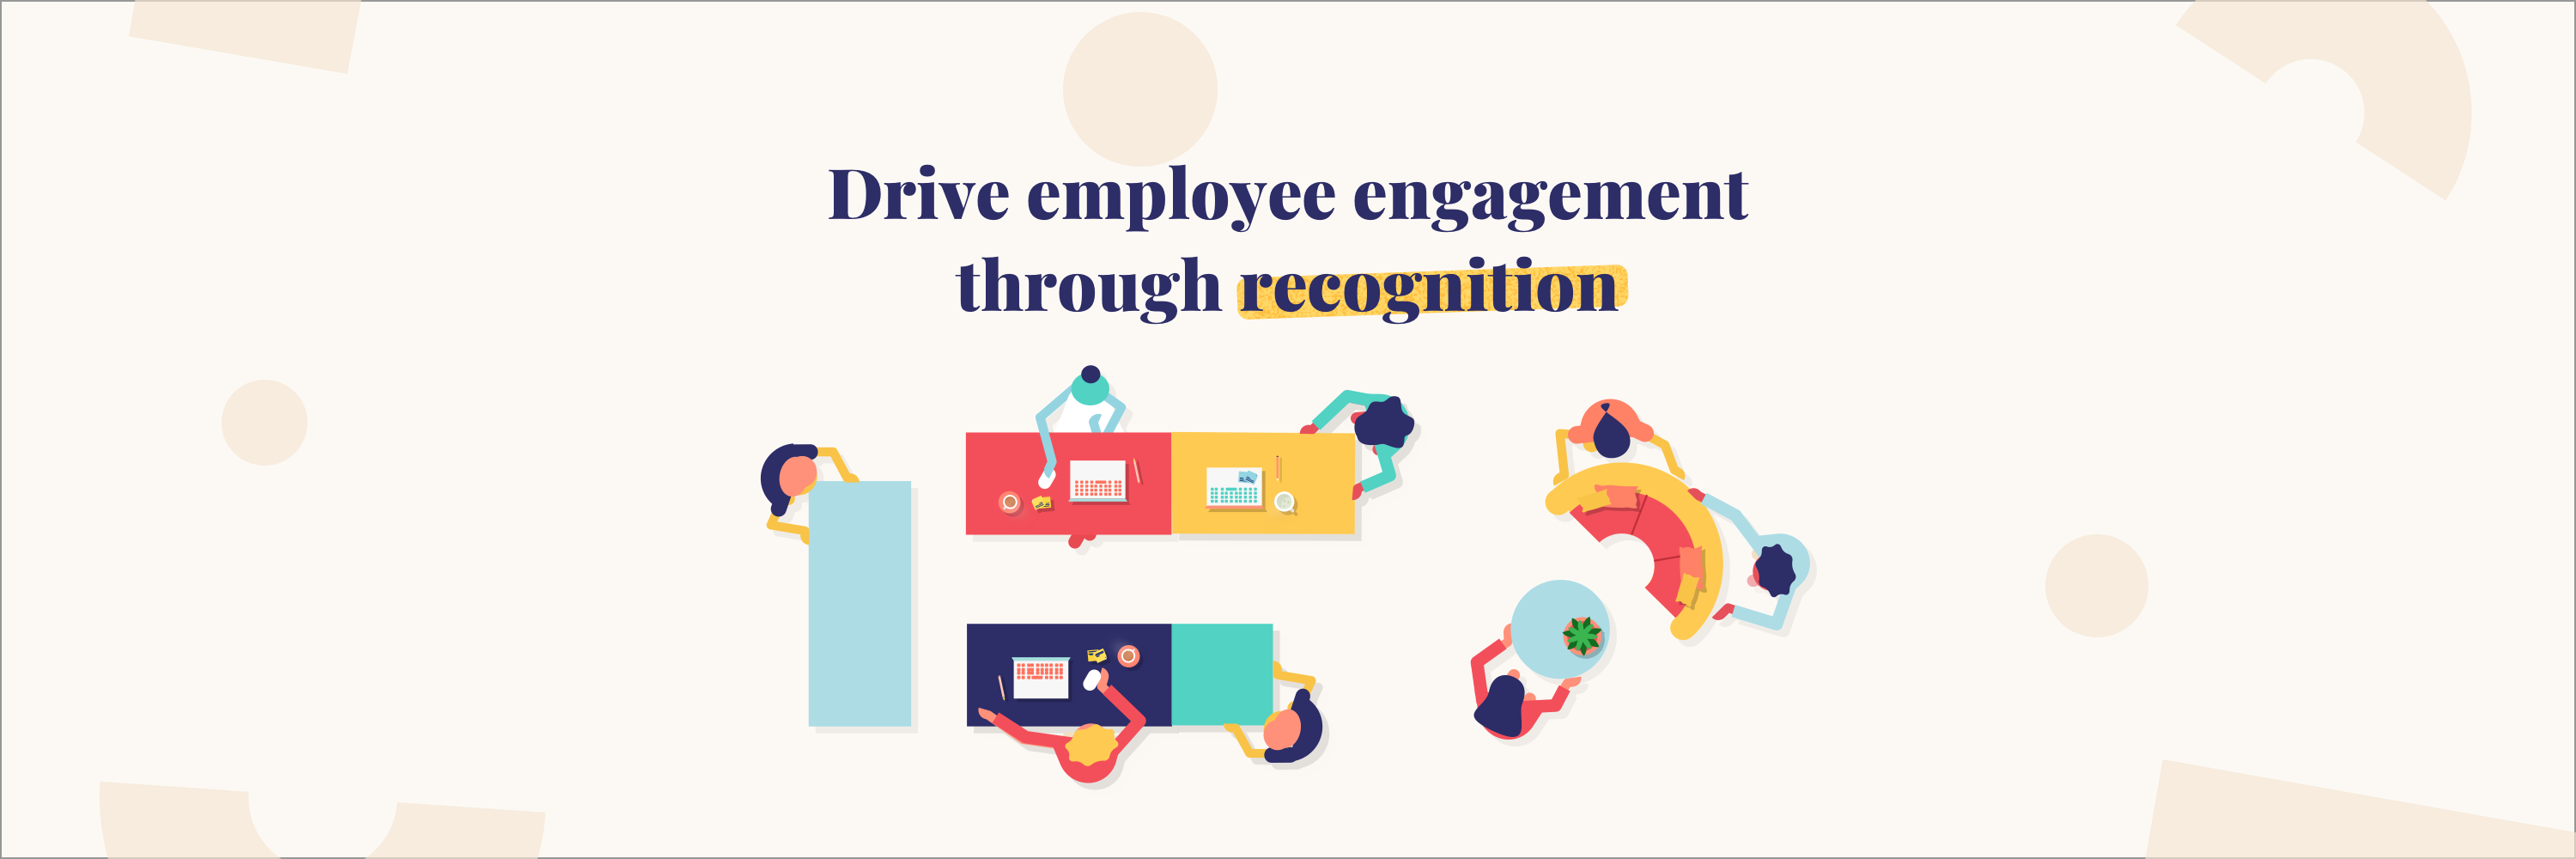 Review Briq: Empowering employees through feedback & recognition - Appvizer